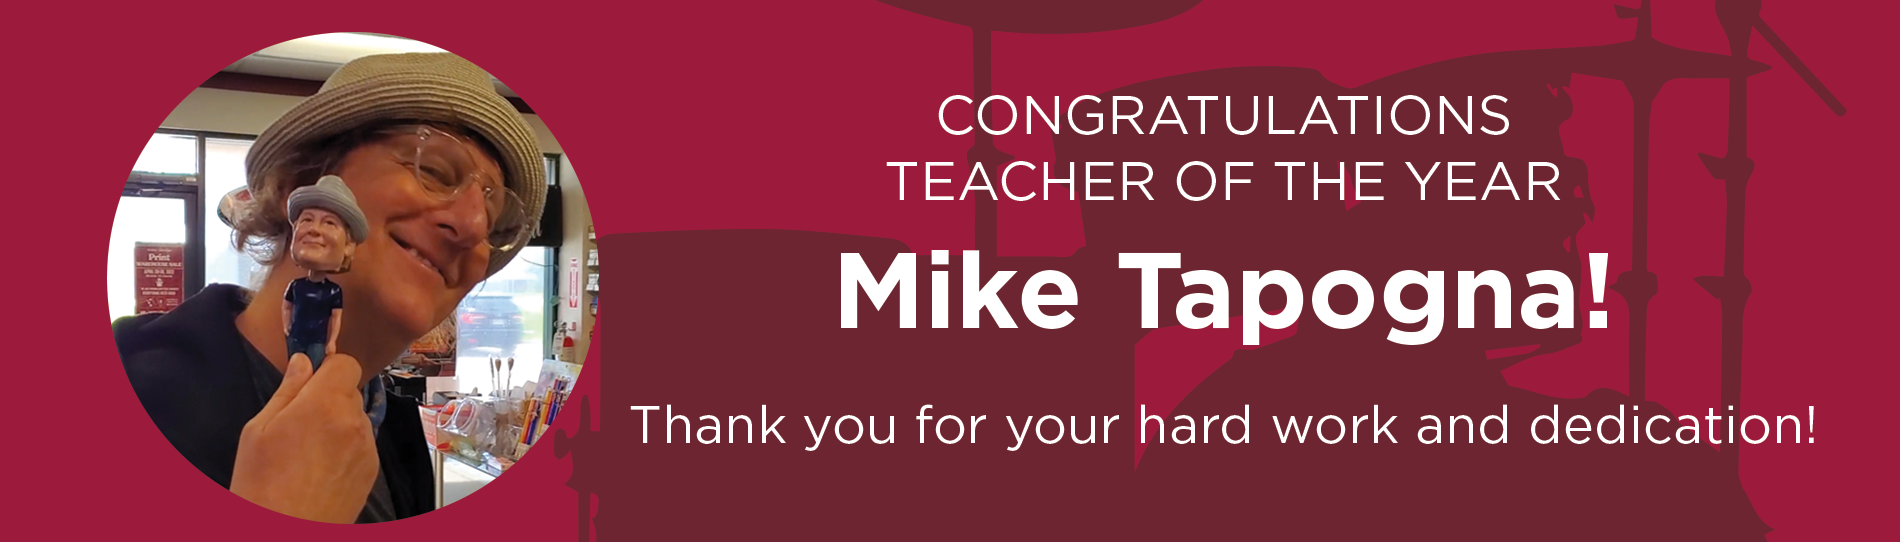 Mike Tapogna teacher of the year. Mike teaches drums at the West Chester Location.